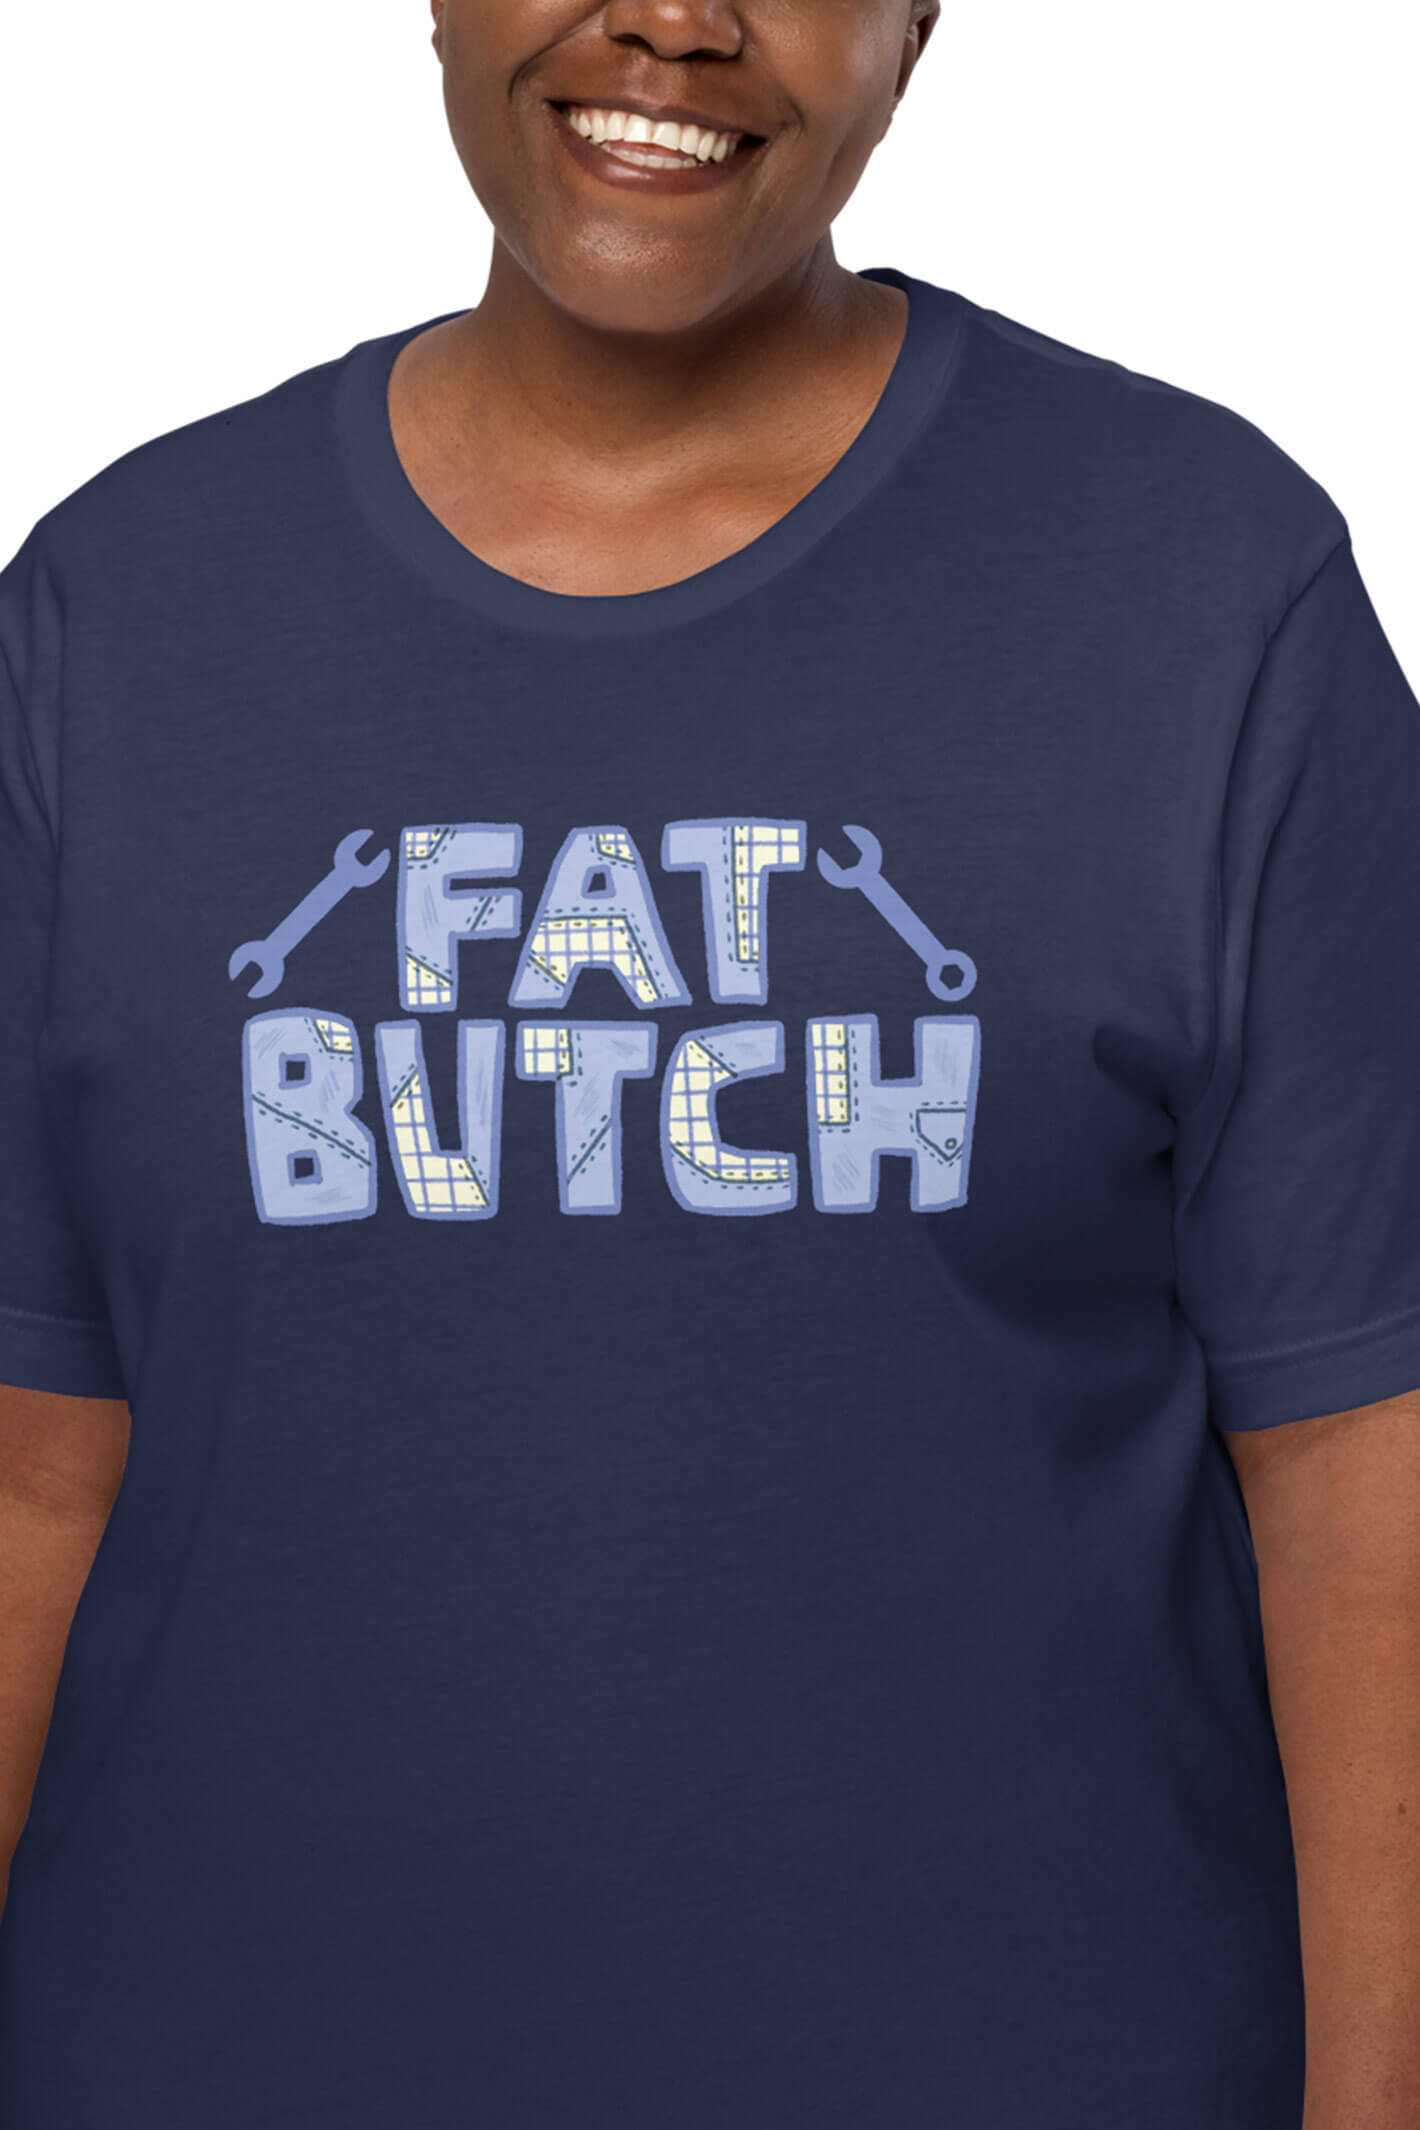 Plus size fat butch graphic tee.